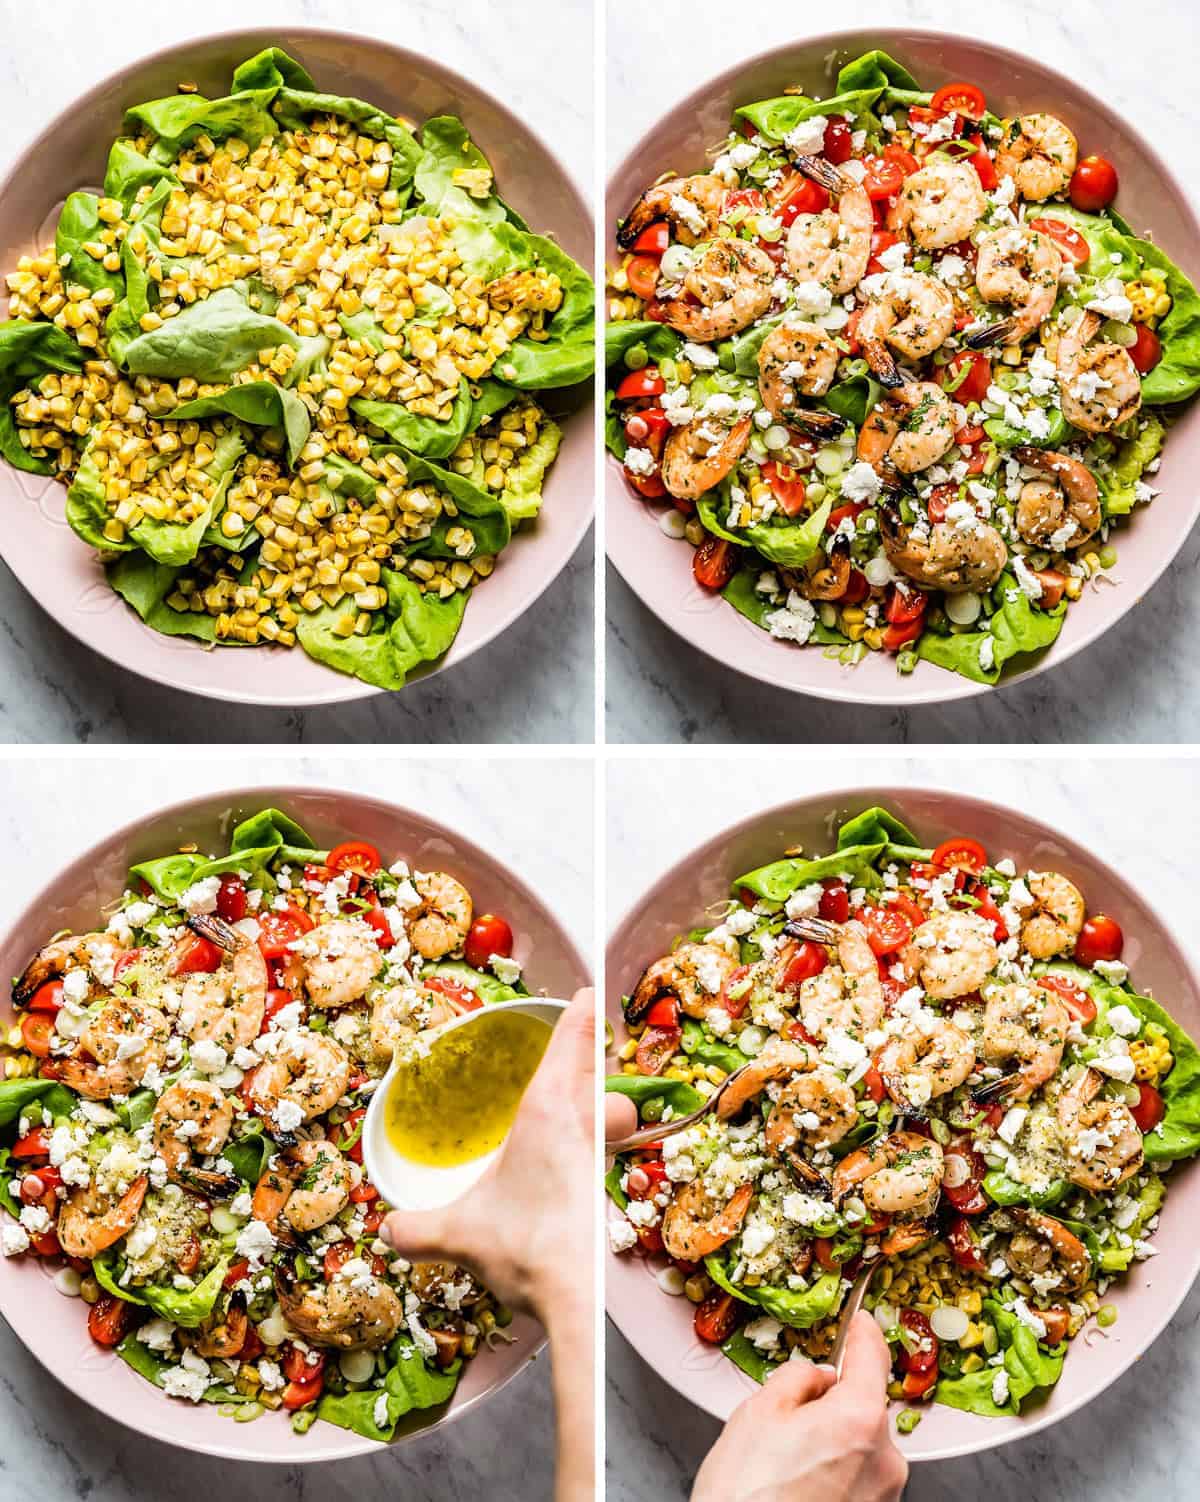 Four images showing the steps of assembling shrimp and corn salad recipe